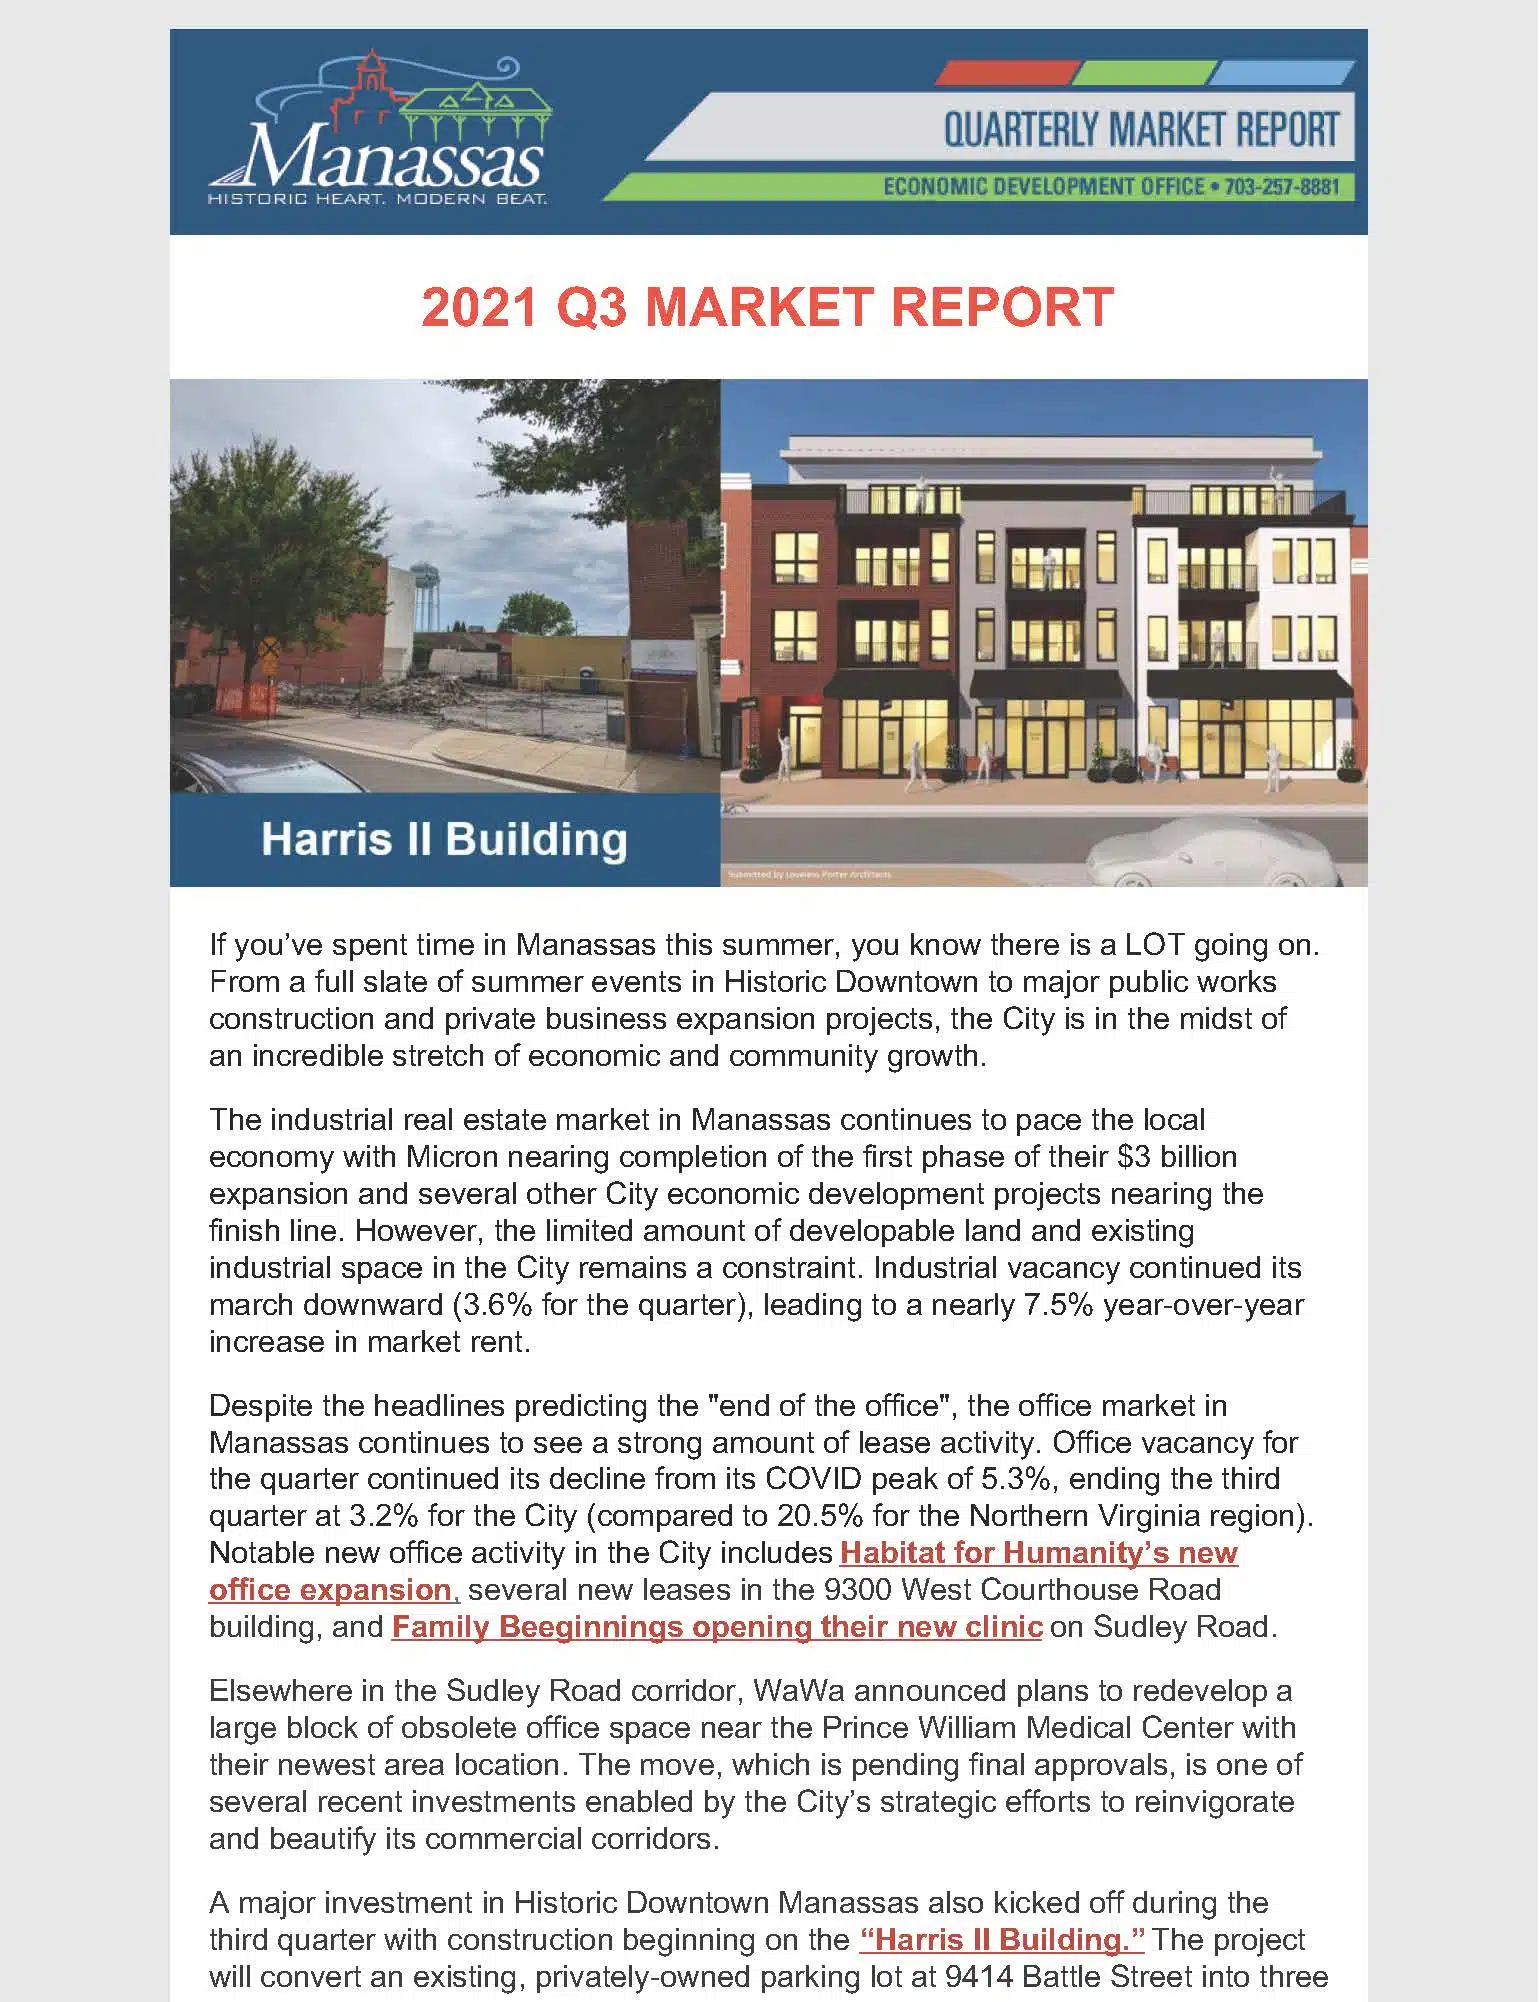 Q3-2021-Market-Report-10-1-21_Page_1 Reports & Resources